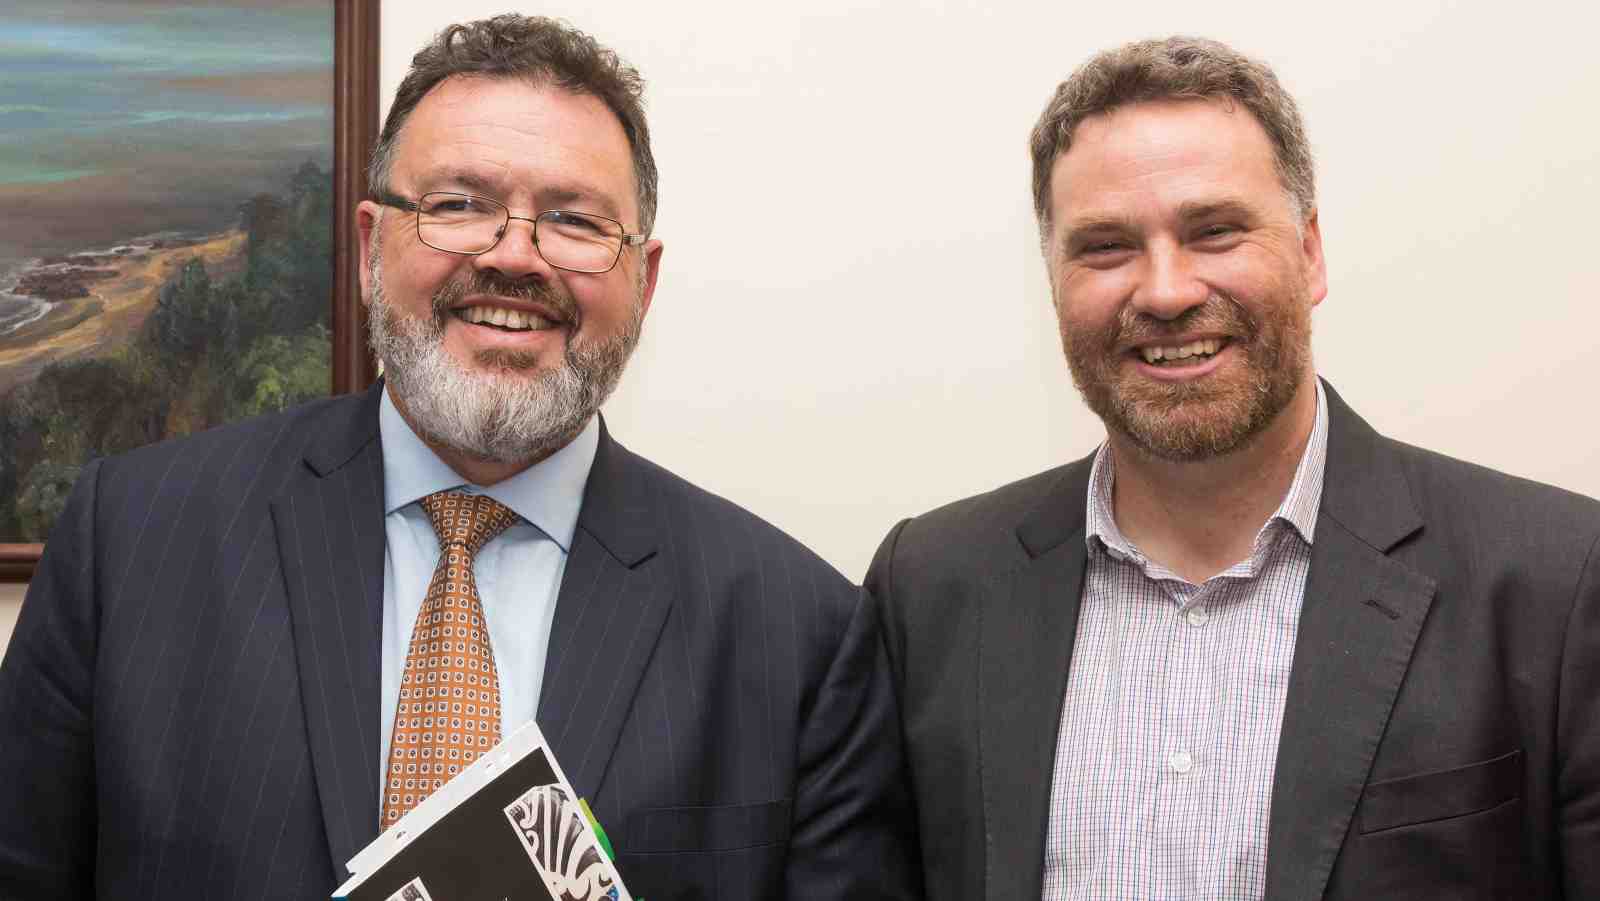 Justice Joe Williams (left) and Dr Carwyn Jones (right) at the launch of New Treaty, New Tradition at Victoria University of Wellington’s Faculty of Law on 8 December 2016.